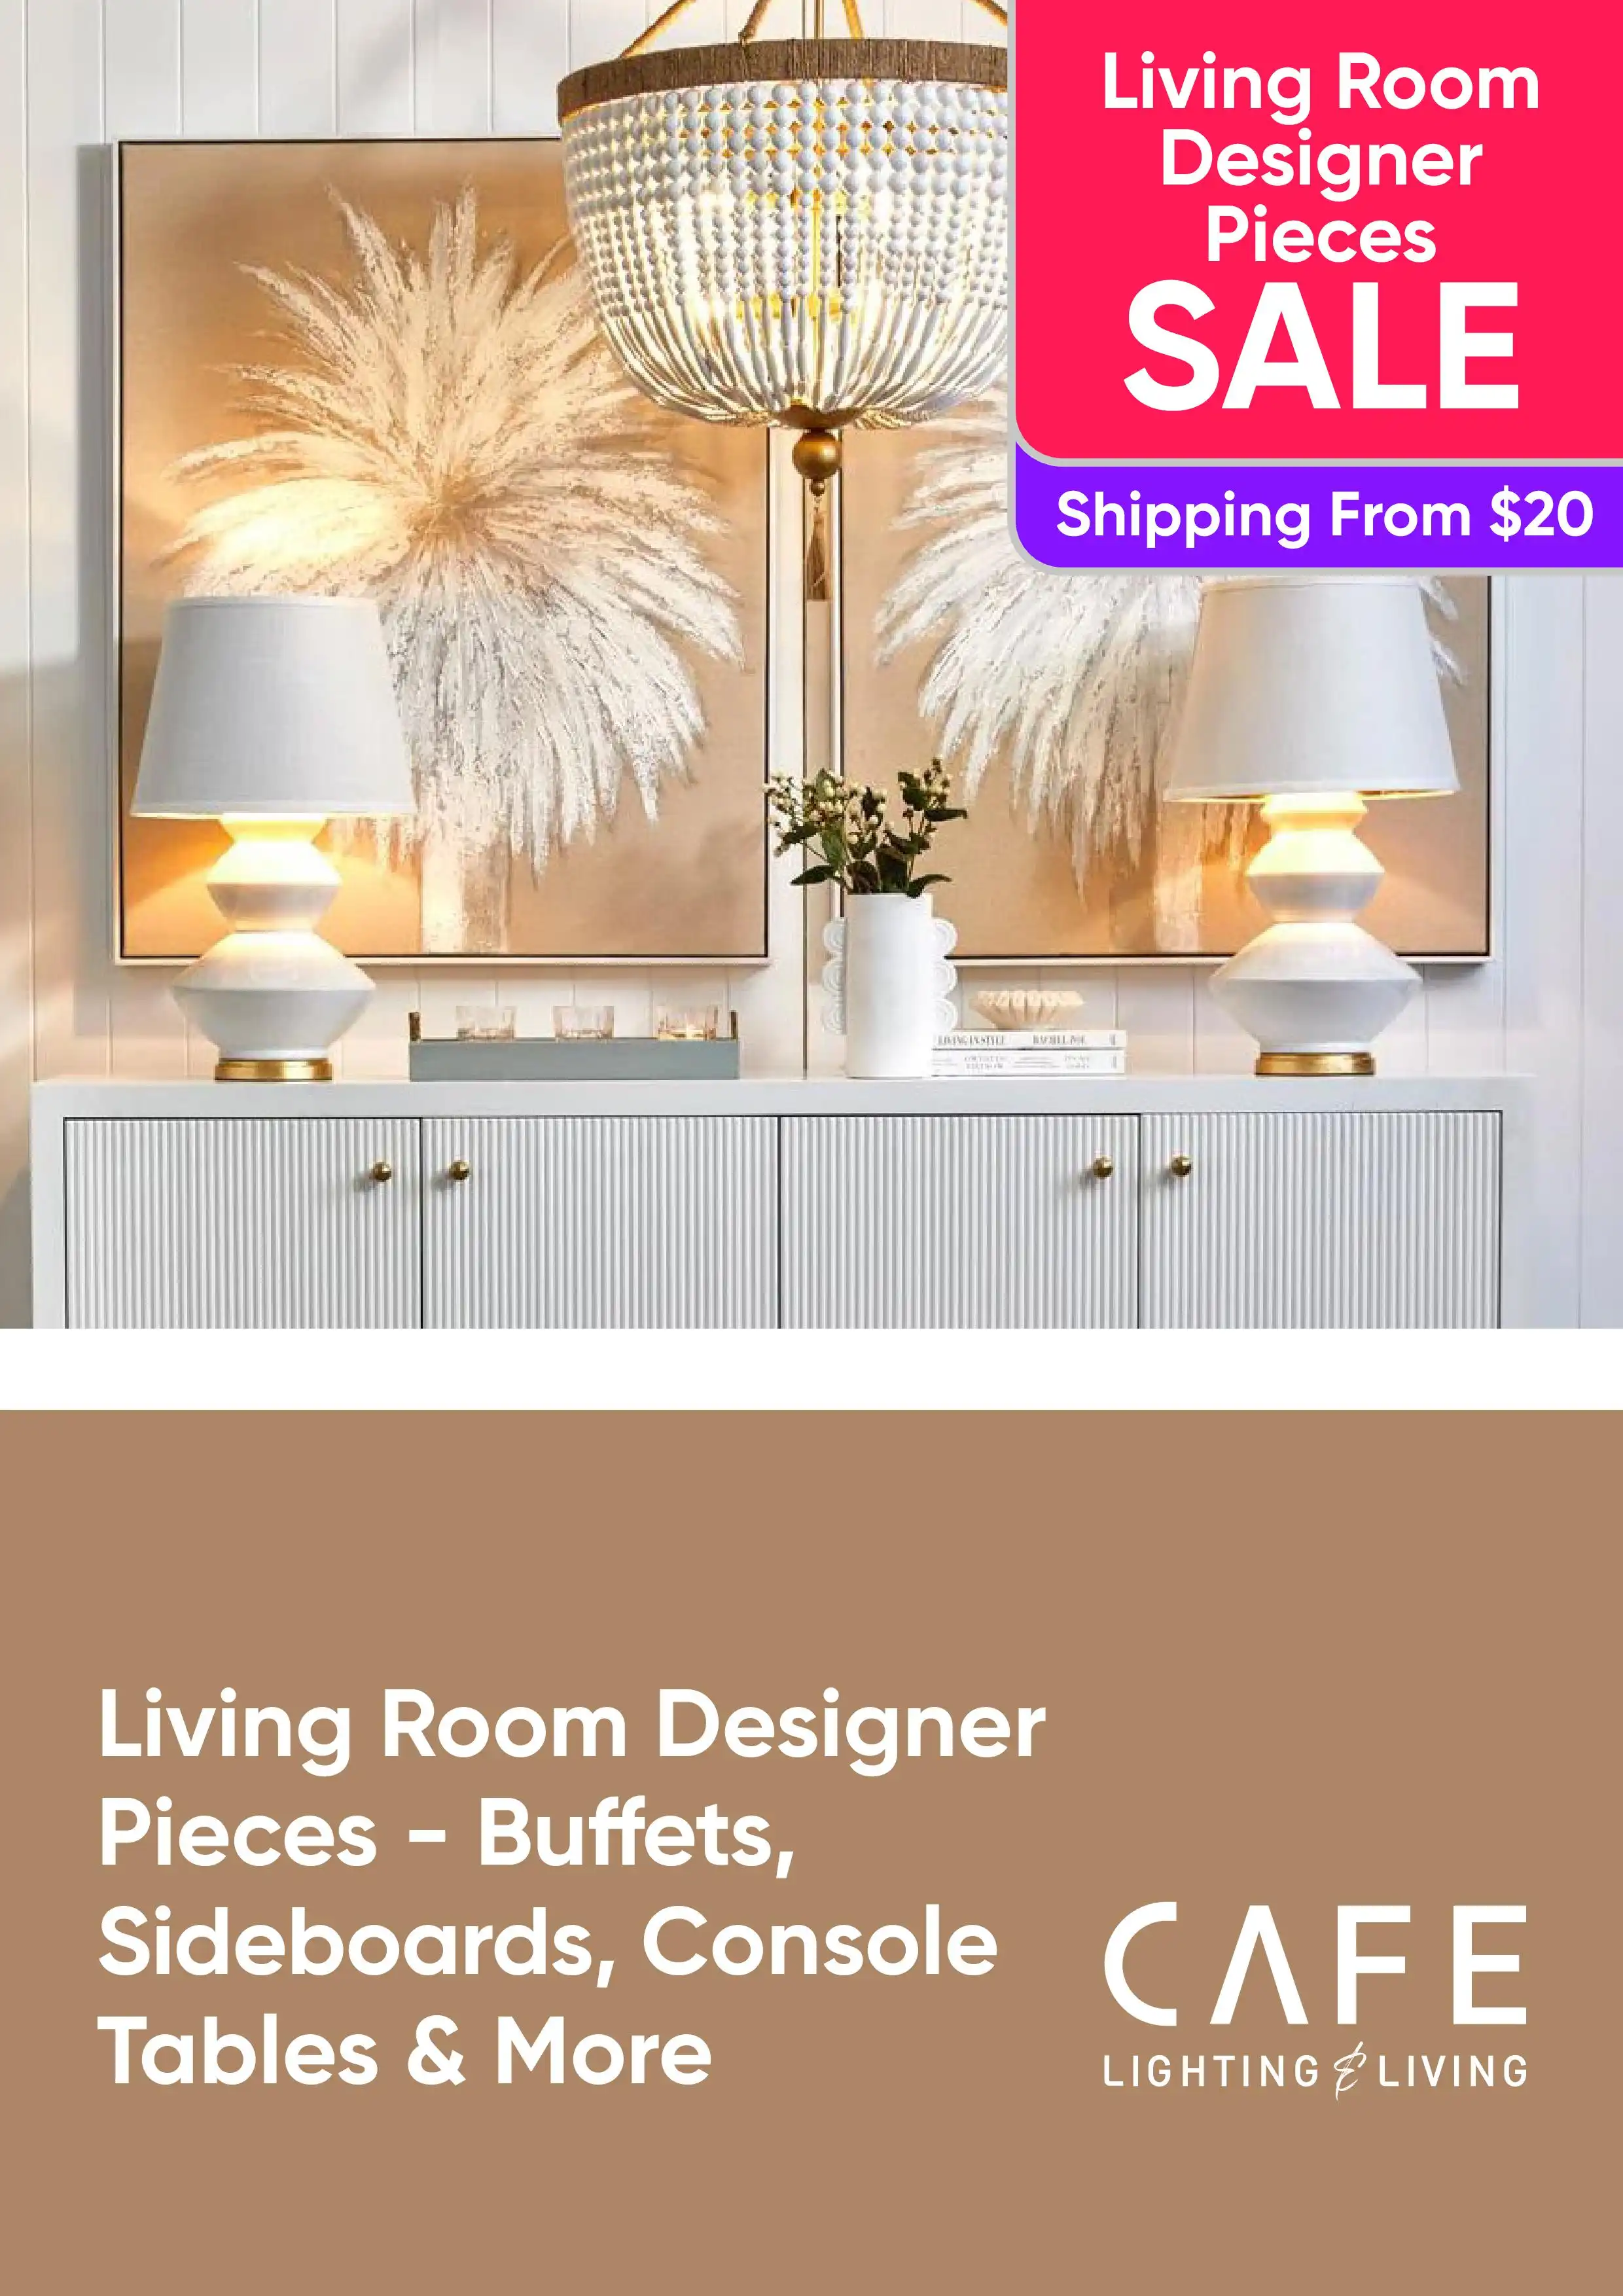 Living Room Designer Pieces - Buffets, Sideboards, Console Tables and More